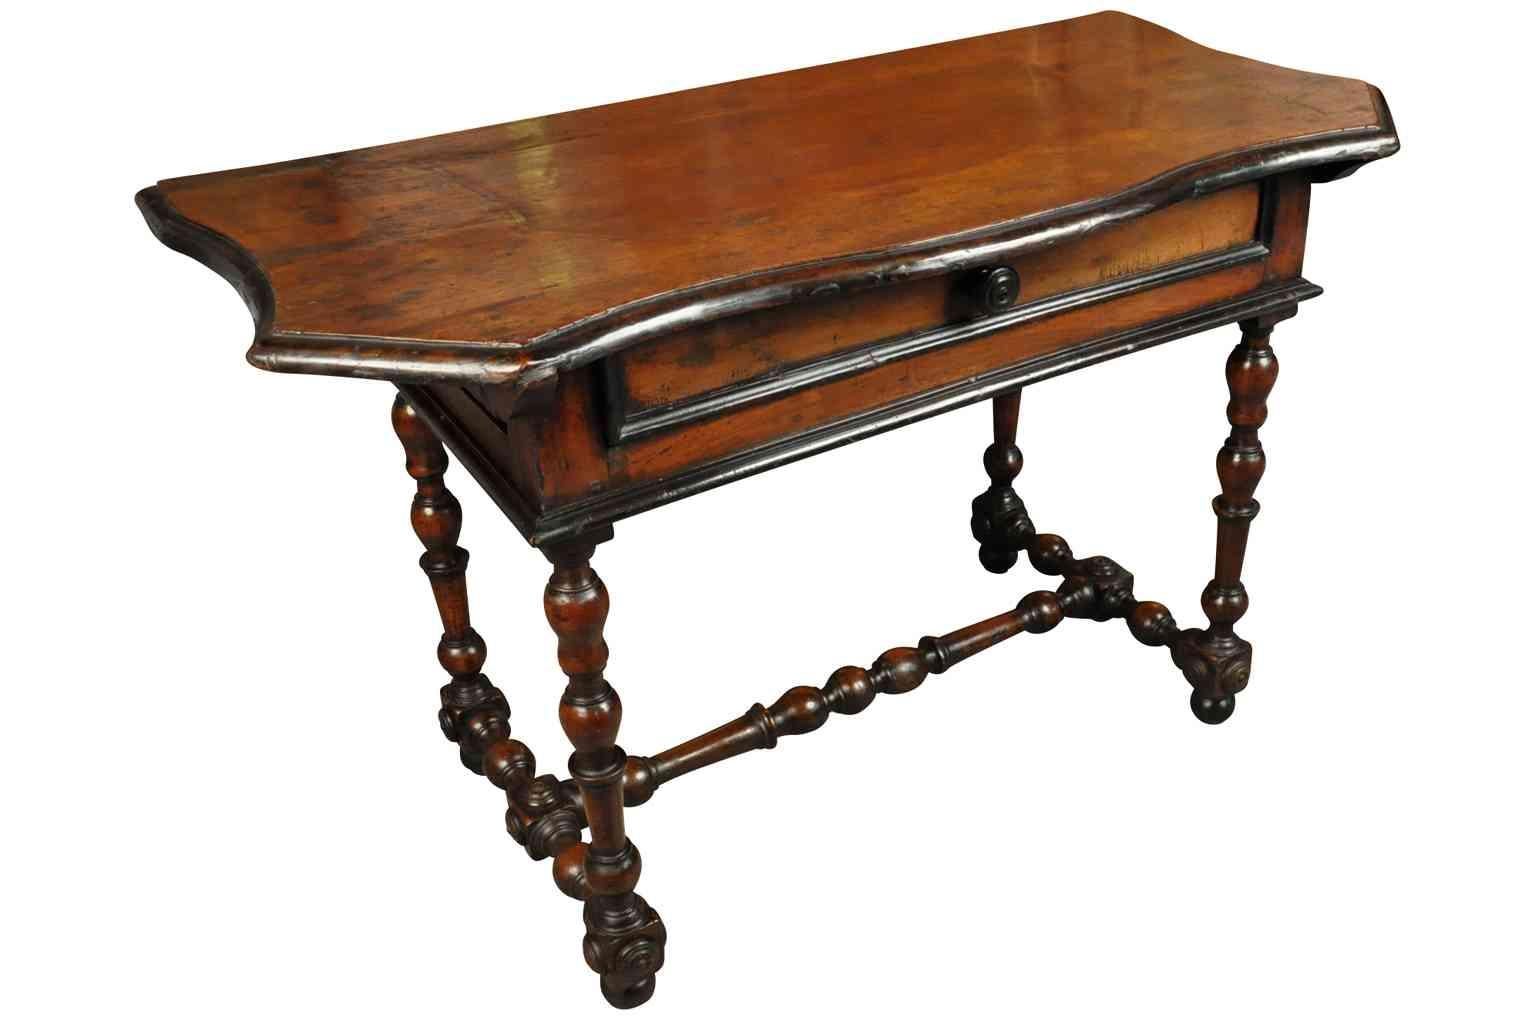 A very handsome 18th century console from Northern Italy. Beautifully constructed in walnut with ebonized detailing and elegant inlay. The tone and patina are outstanding. Perfect not only as a console, but serves wonderfully as an end table or sofa